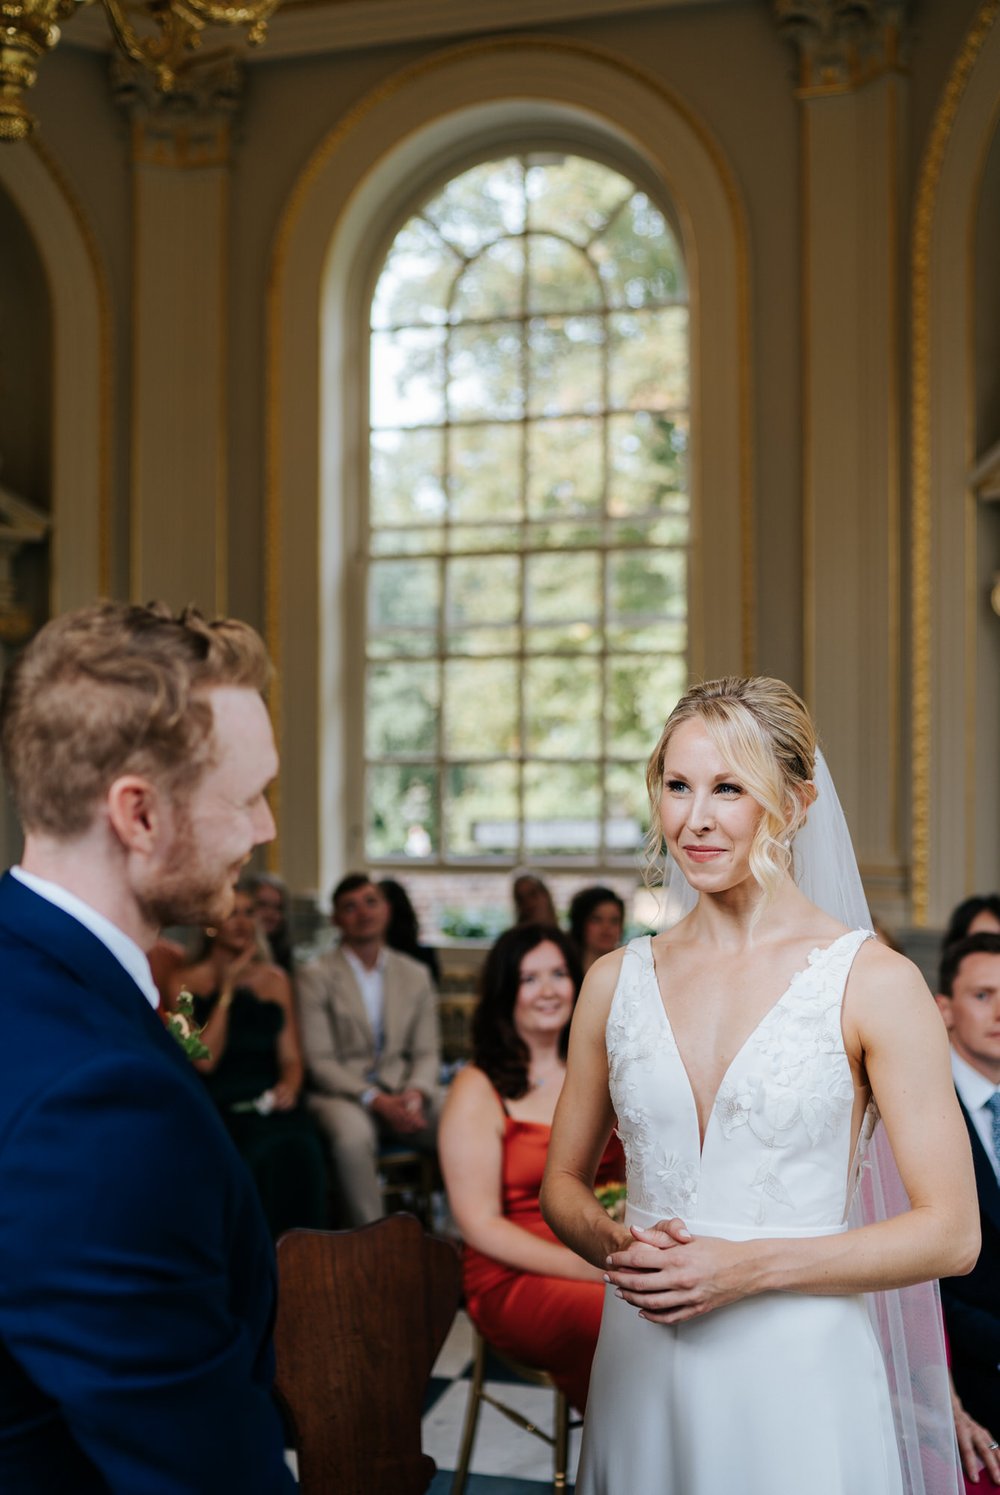 Bride looks at groom during wedding ceremony at Orleans House Gallery wedding